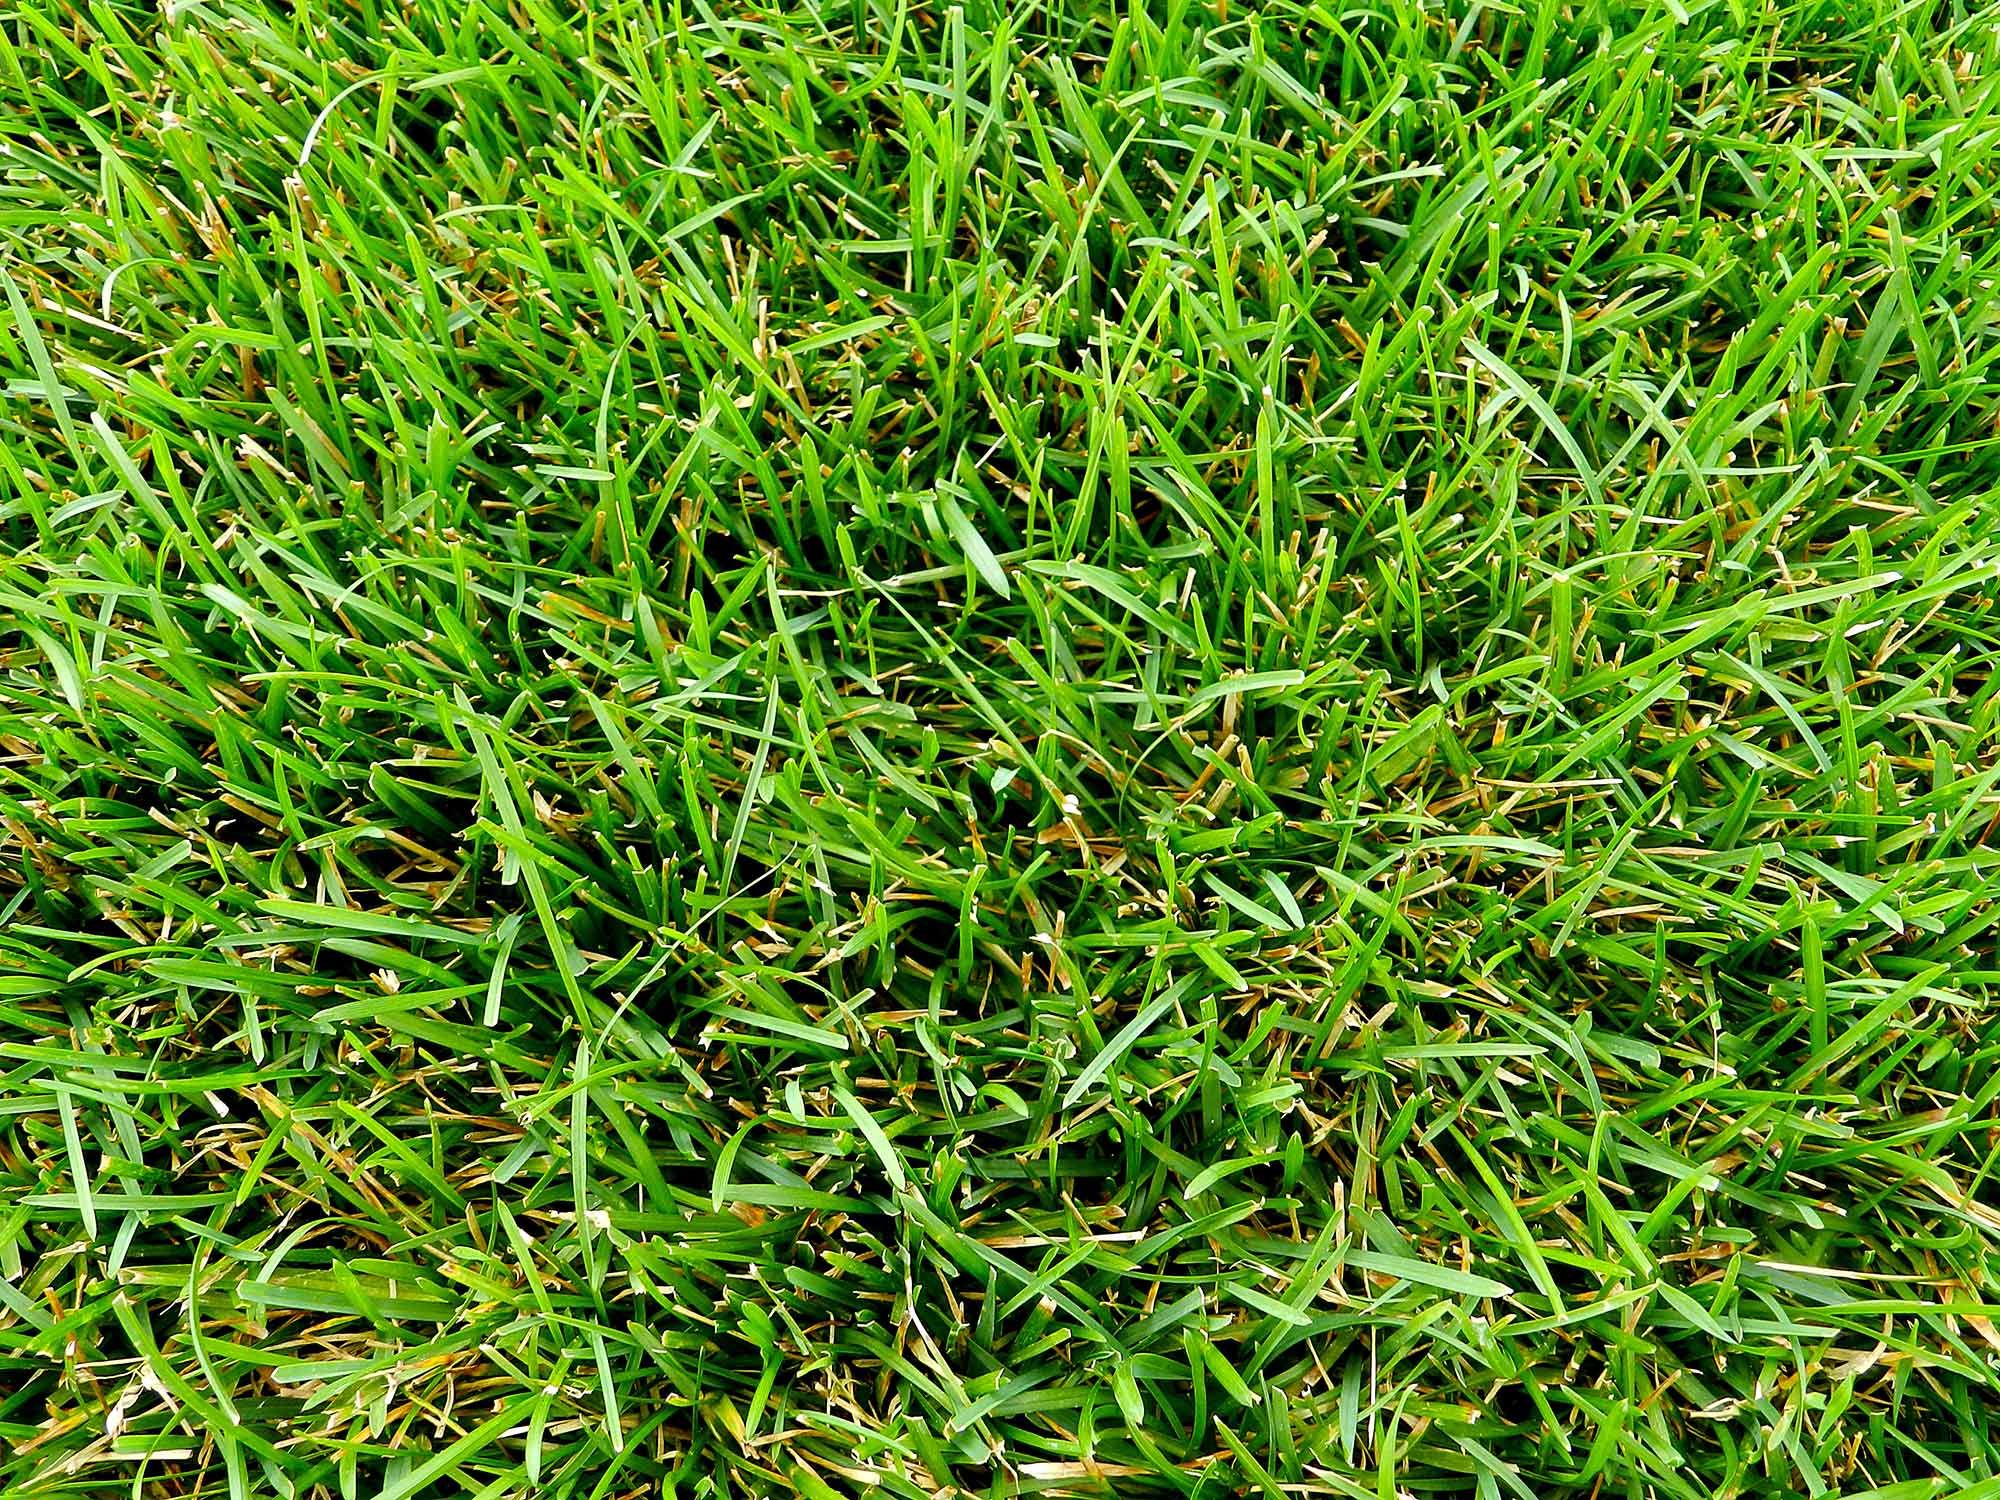 Close up of sod grass